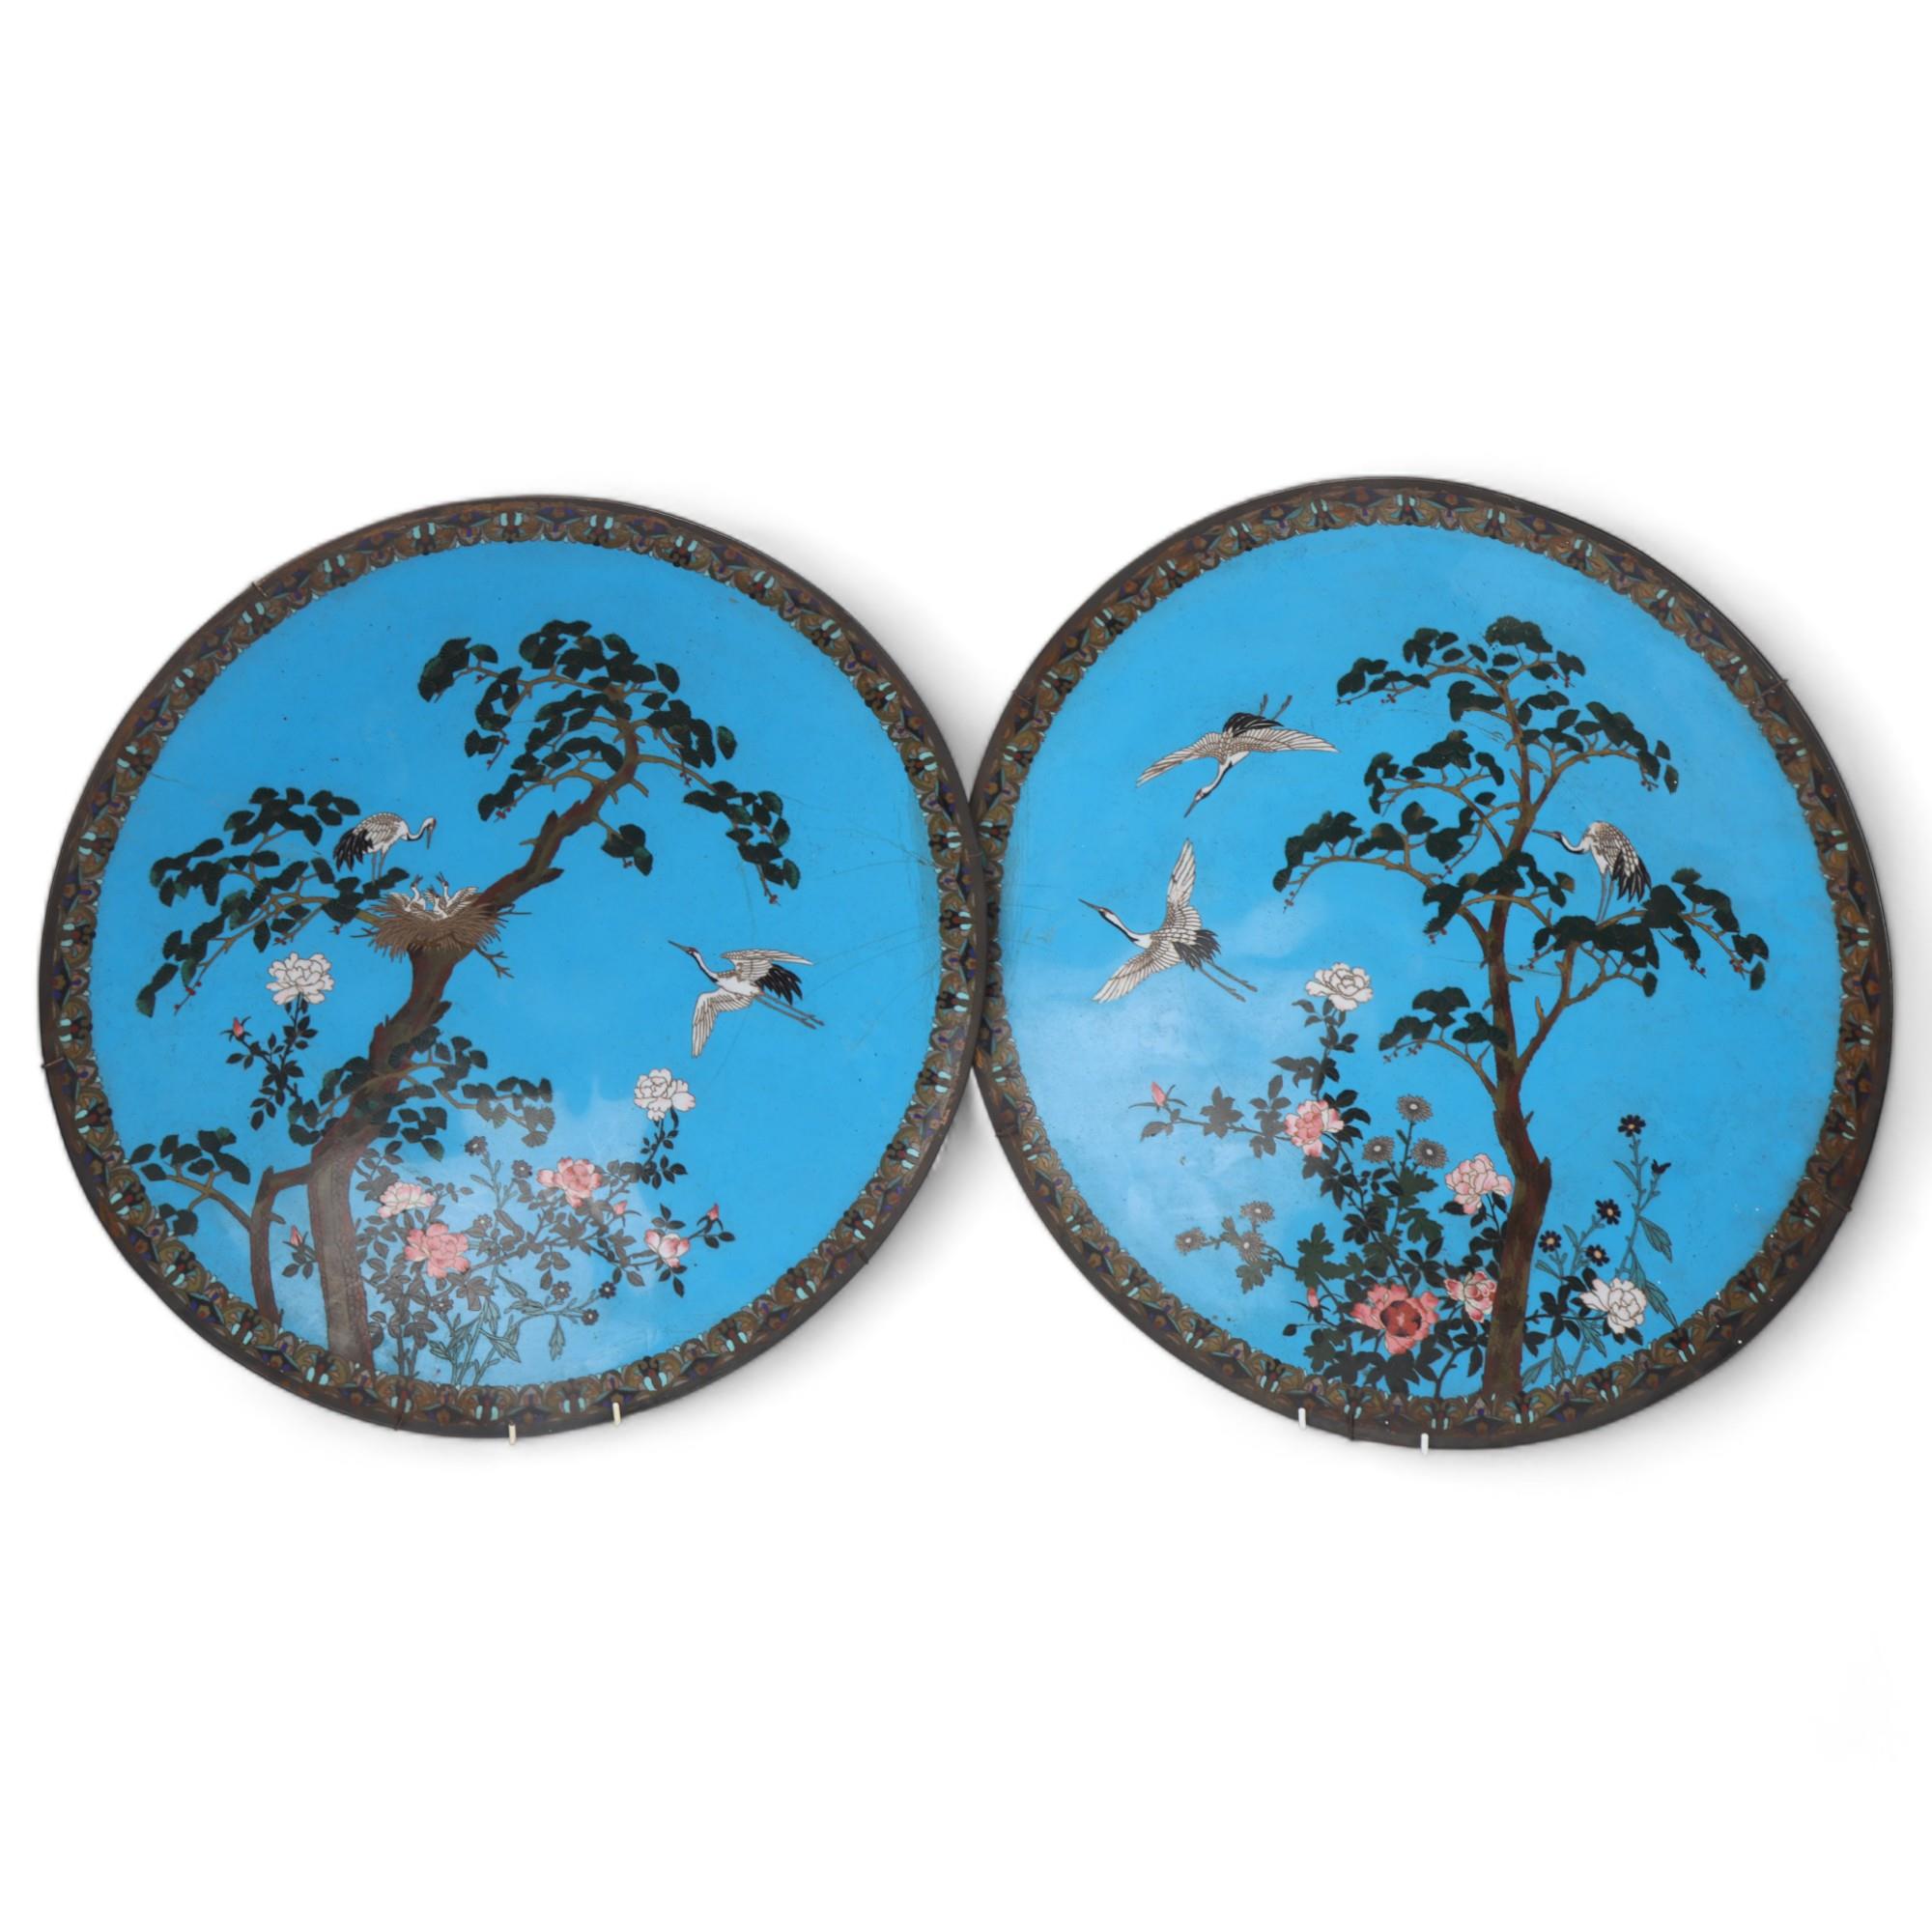 A large pair of Chinese cloisonne enamel wall chargers, decorated with cranes and blossom trees,